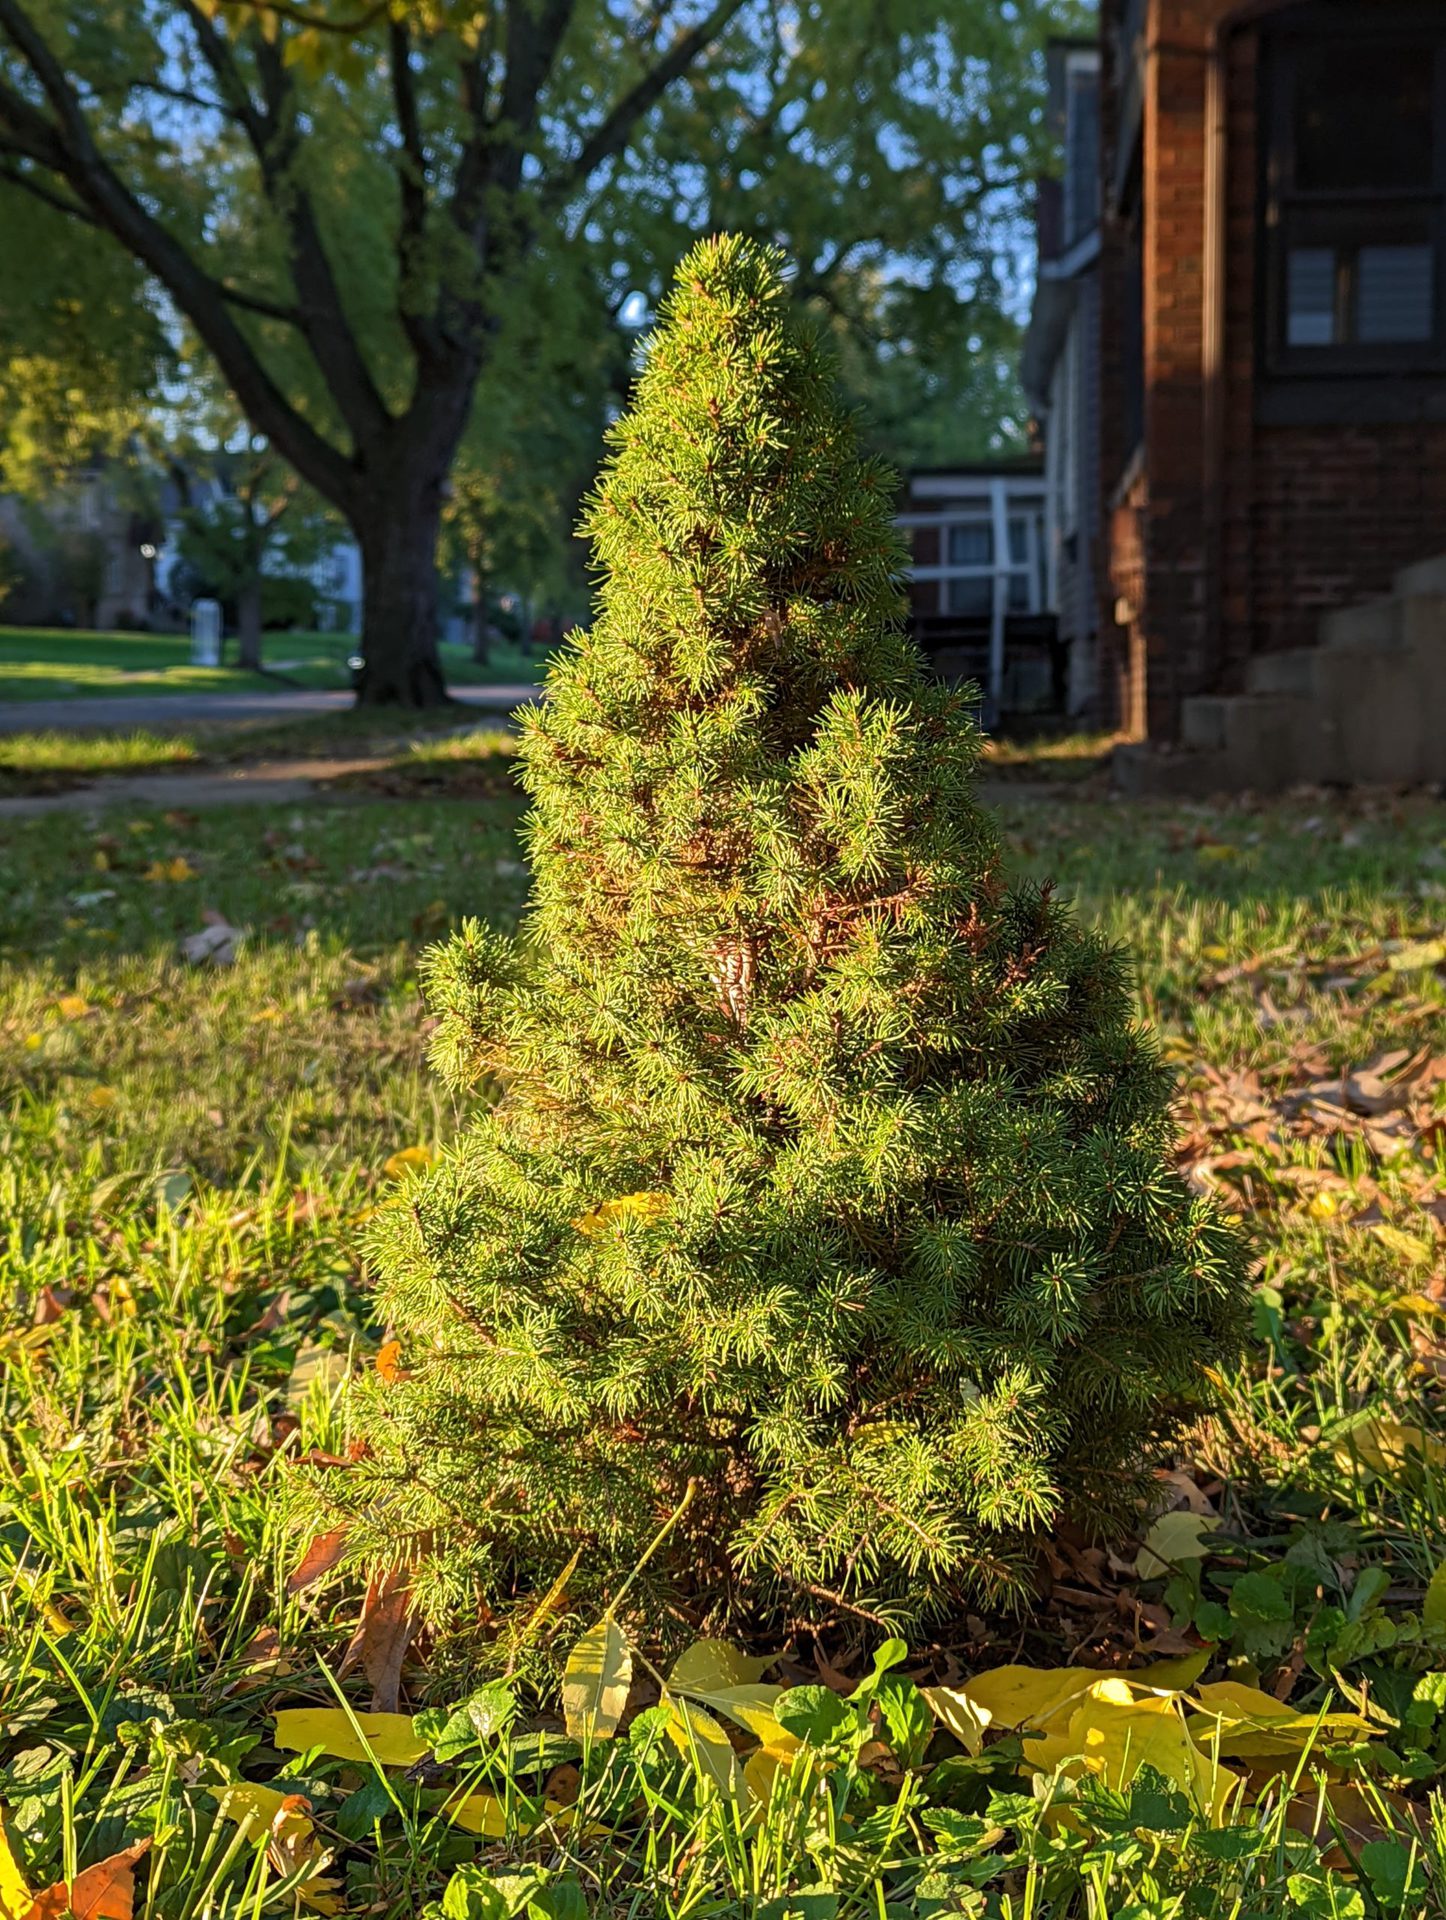 An image of a pine tree taken with the Google Pixel 6 camera